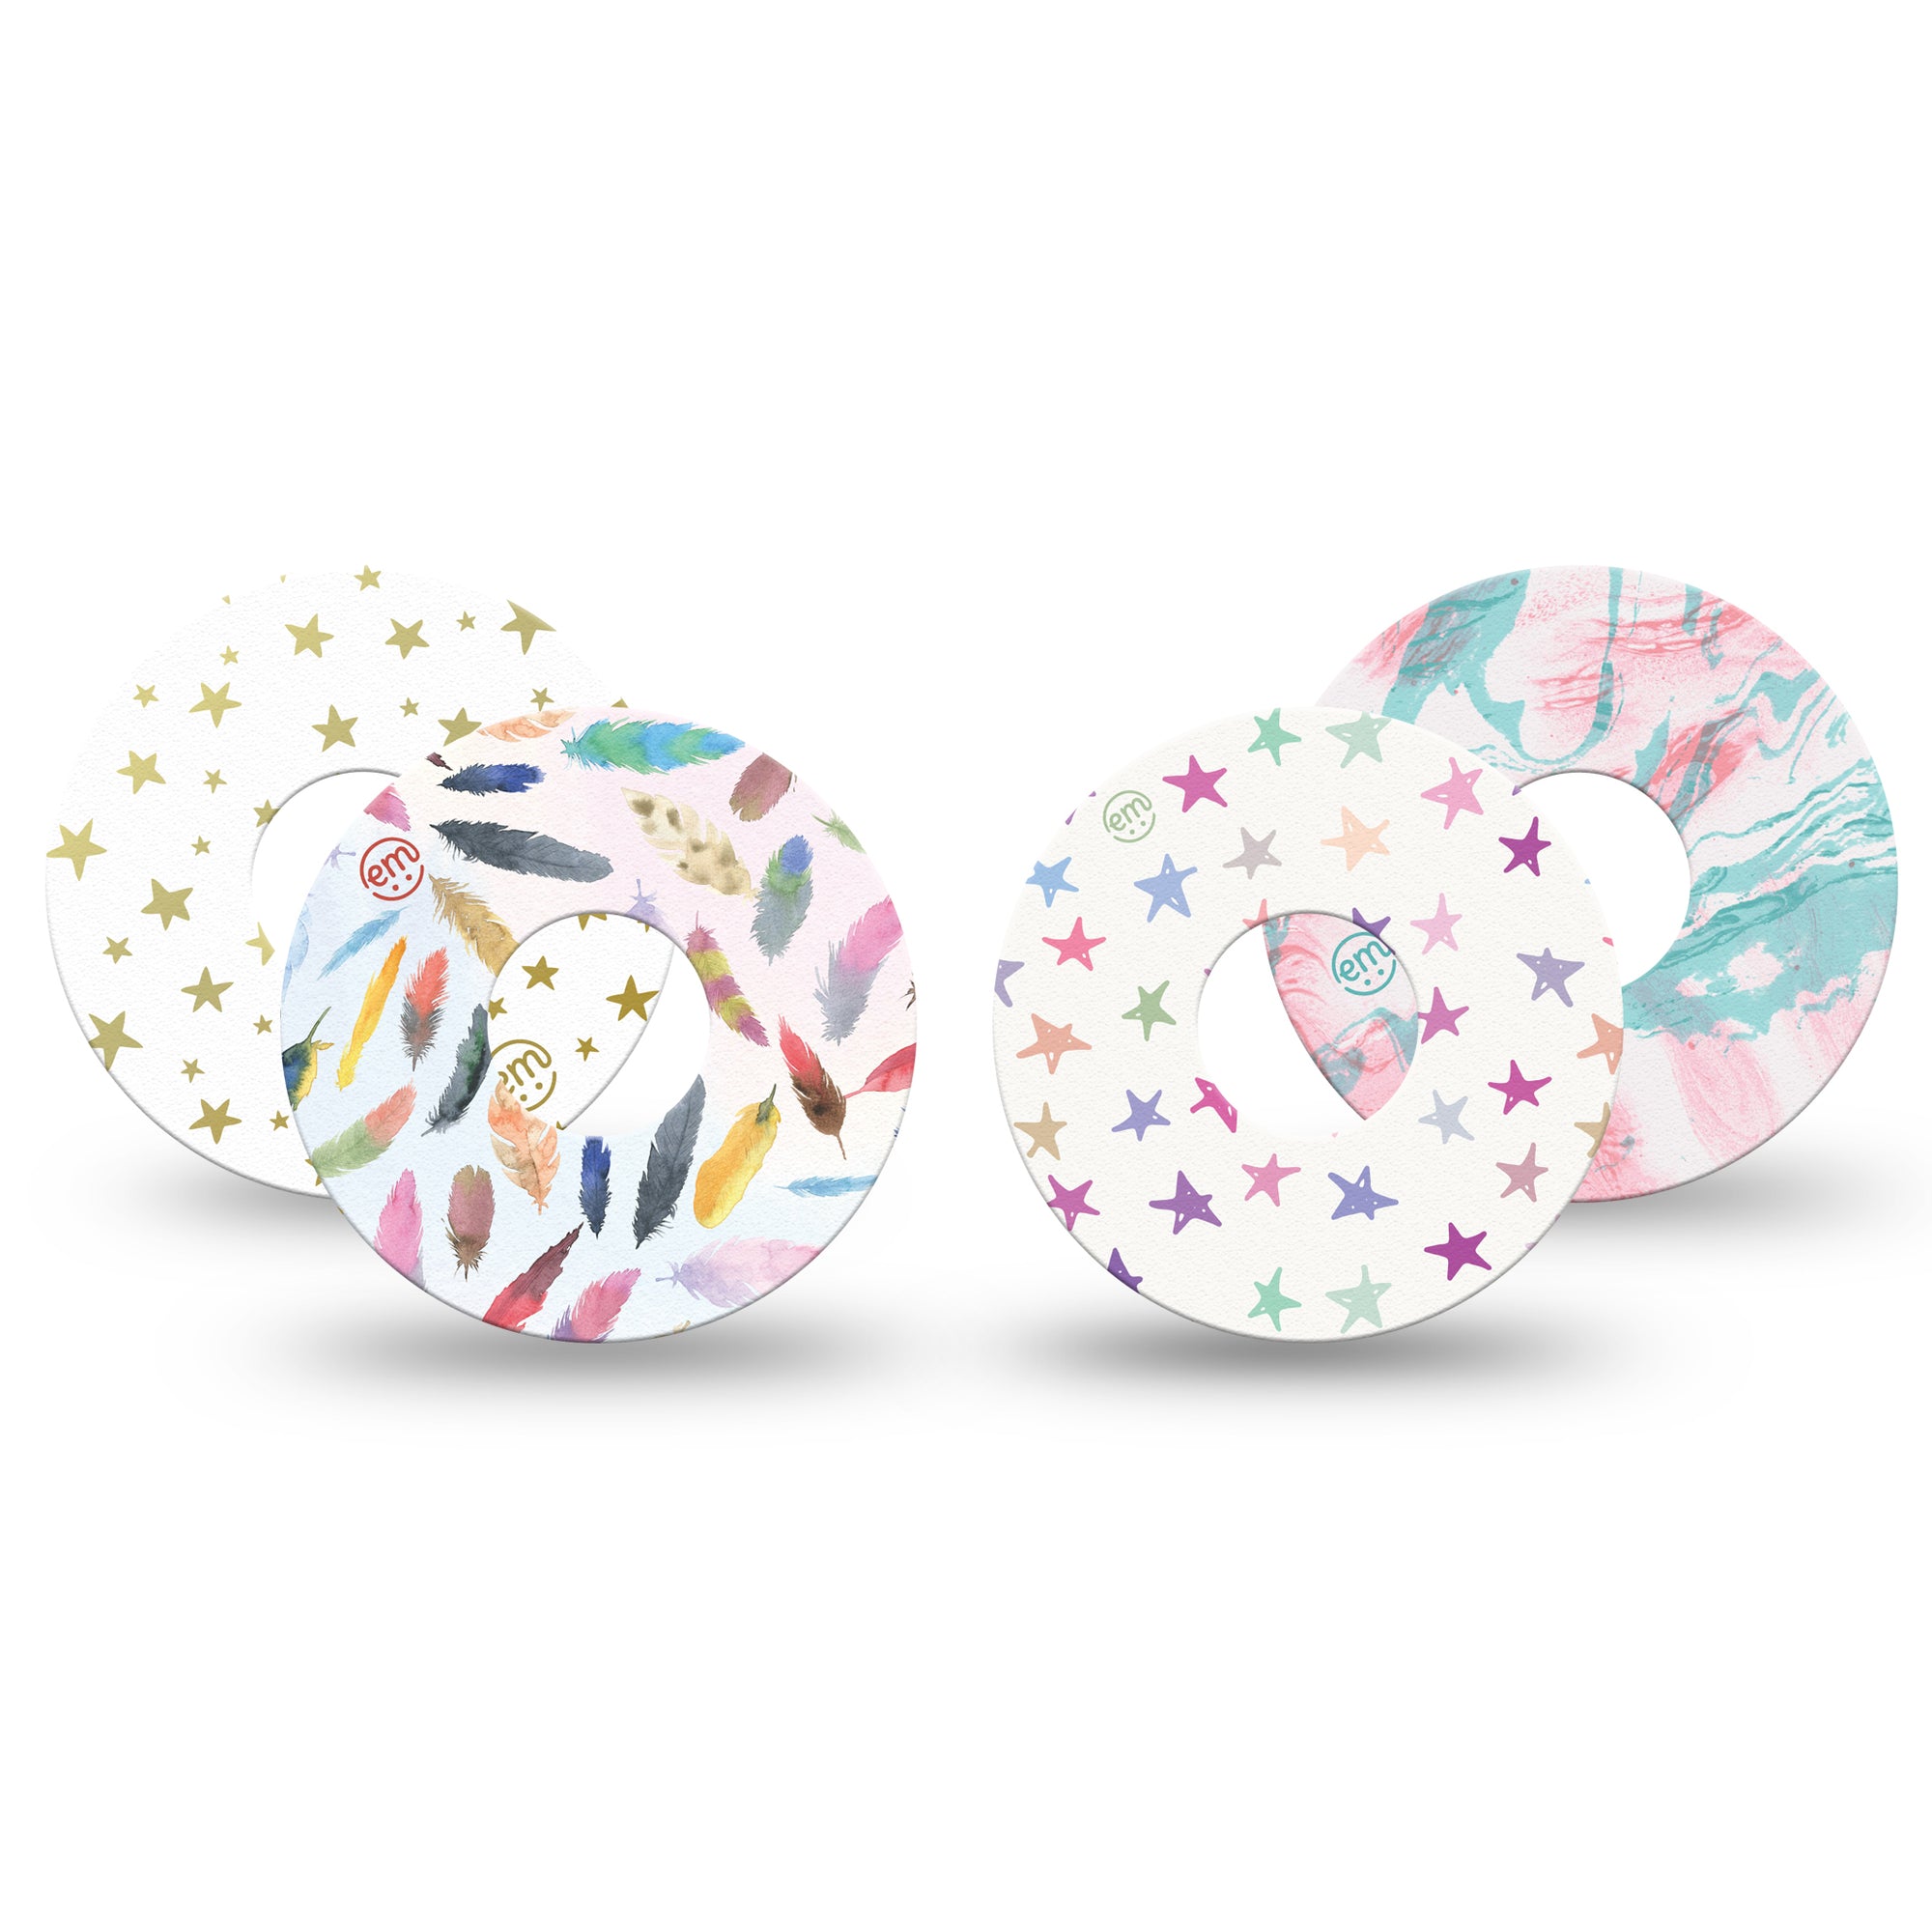 ExpressionMed Kaleidoscopic Variety Pack Libre 3 Tape, 4-Pack, Stars, Feathers, Pastel Color Themed, CGM Patch Design